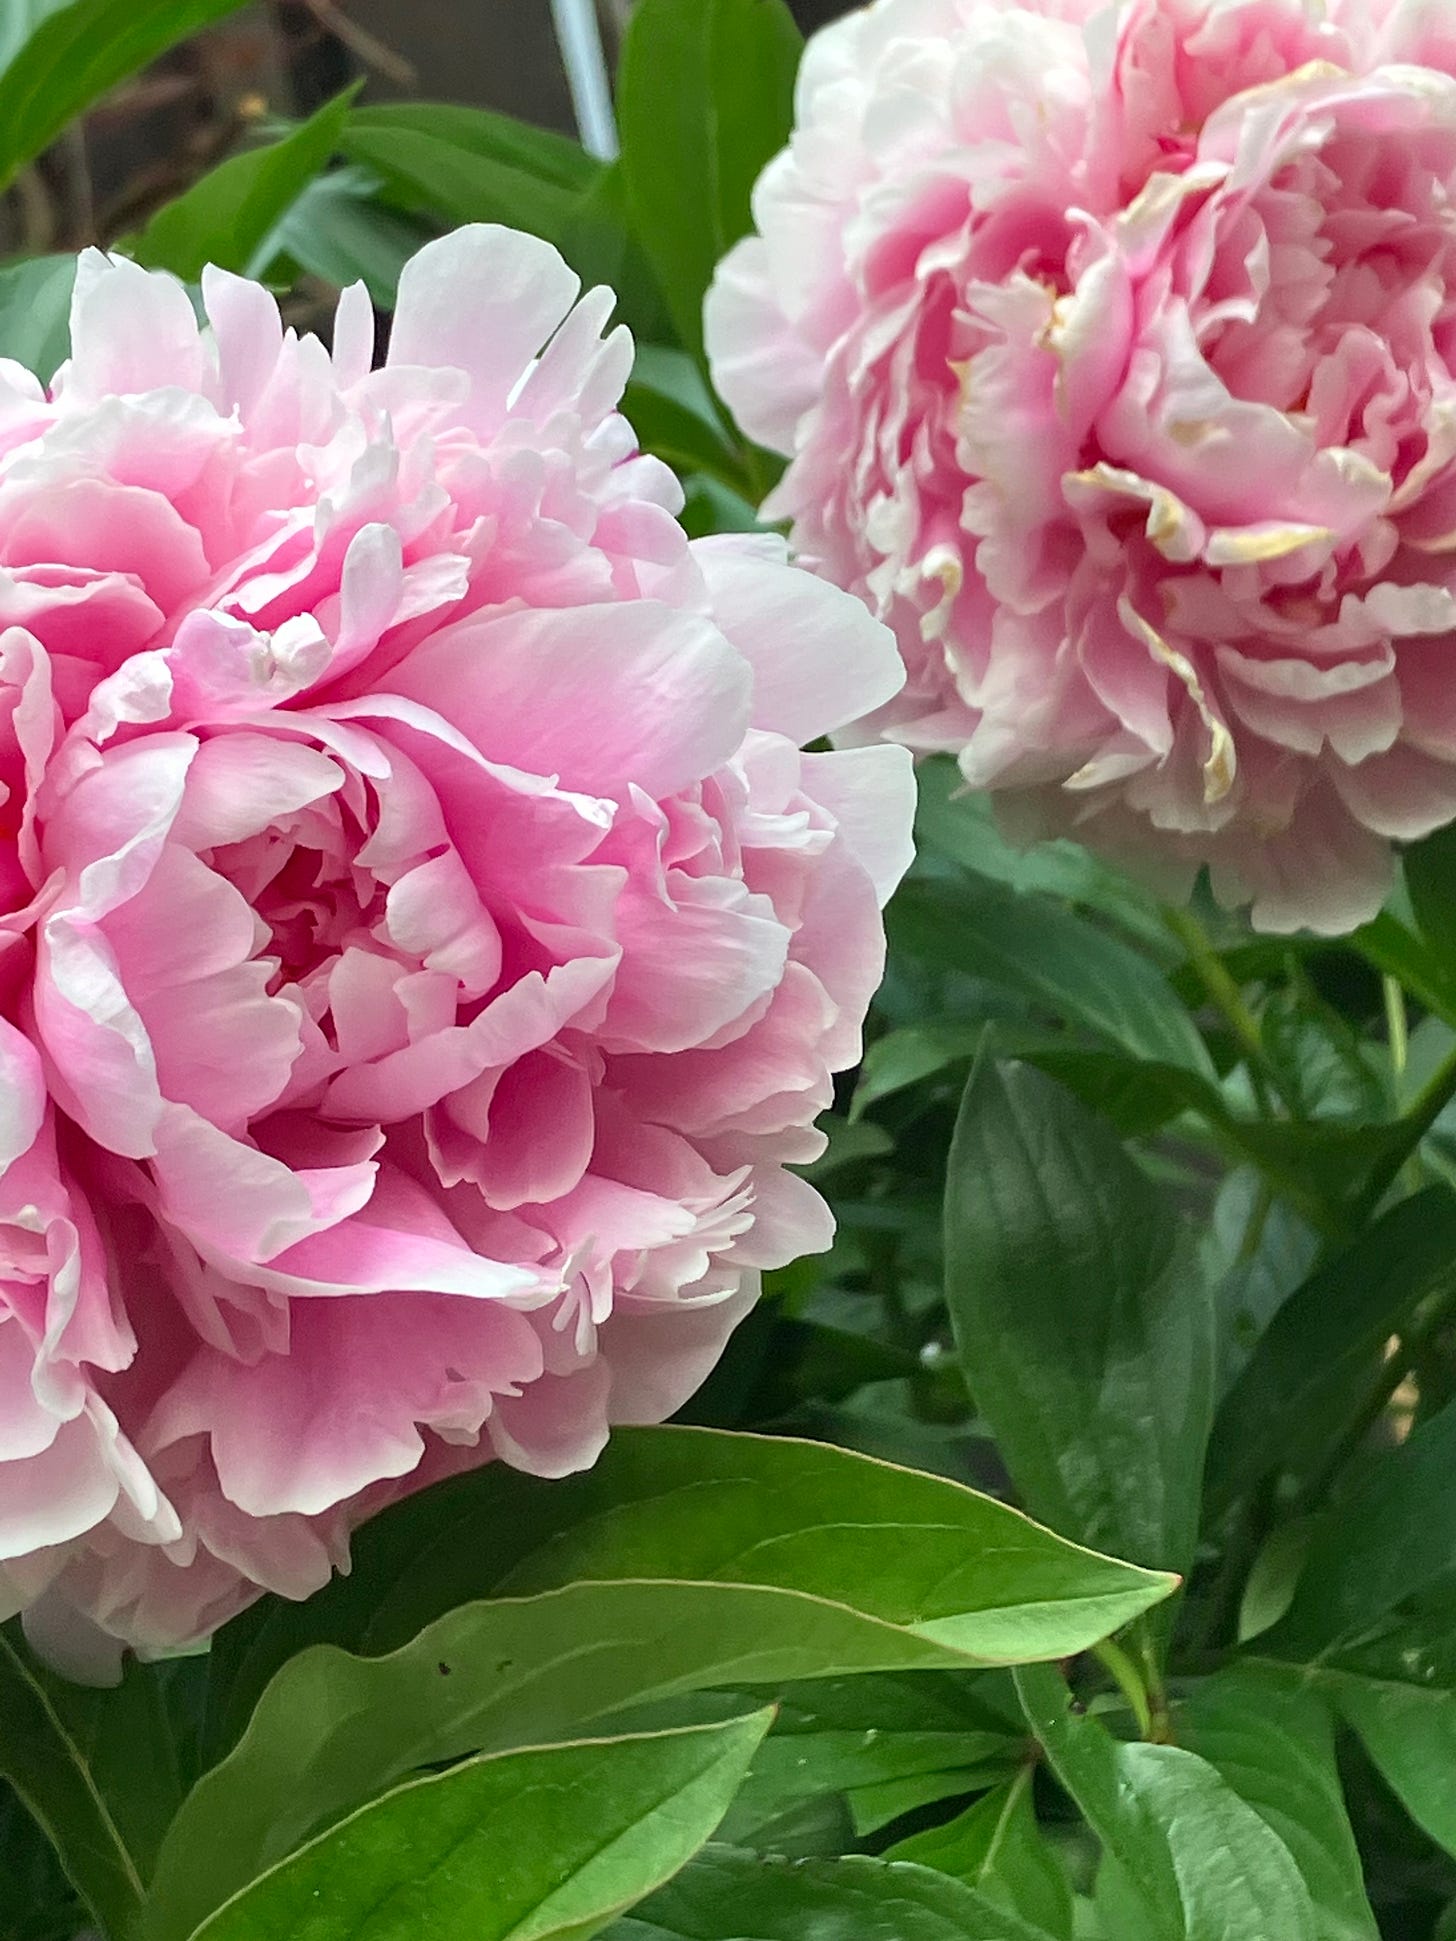 A close up of 2 light pink peonies growing in a garden